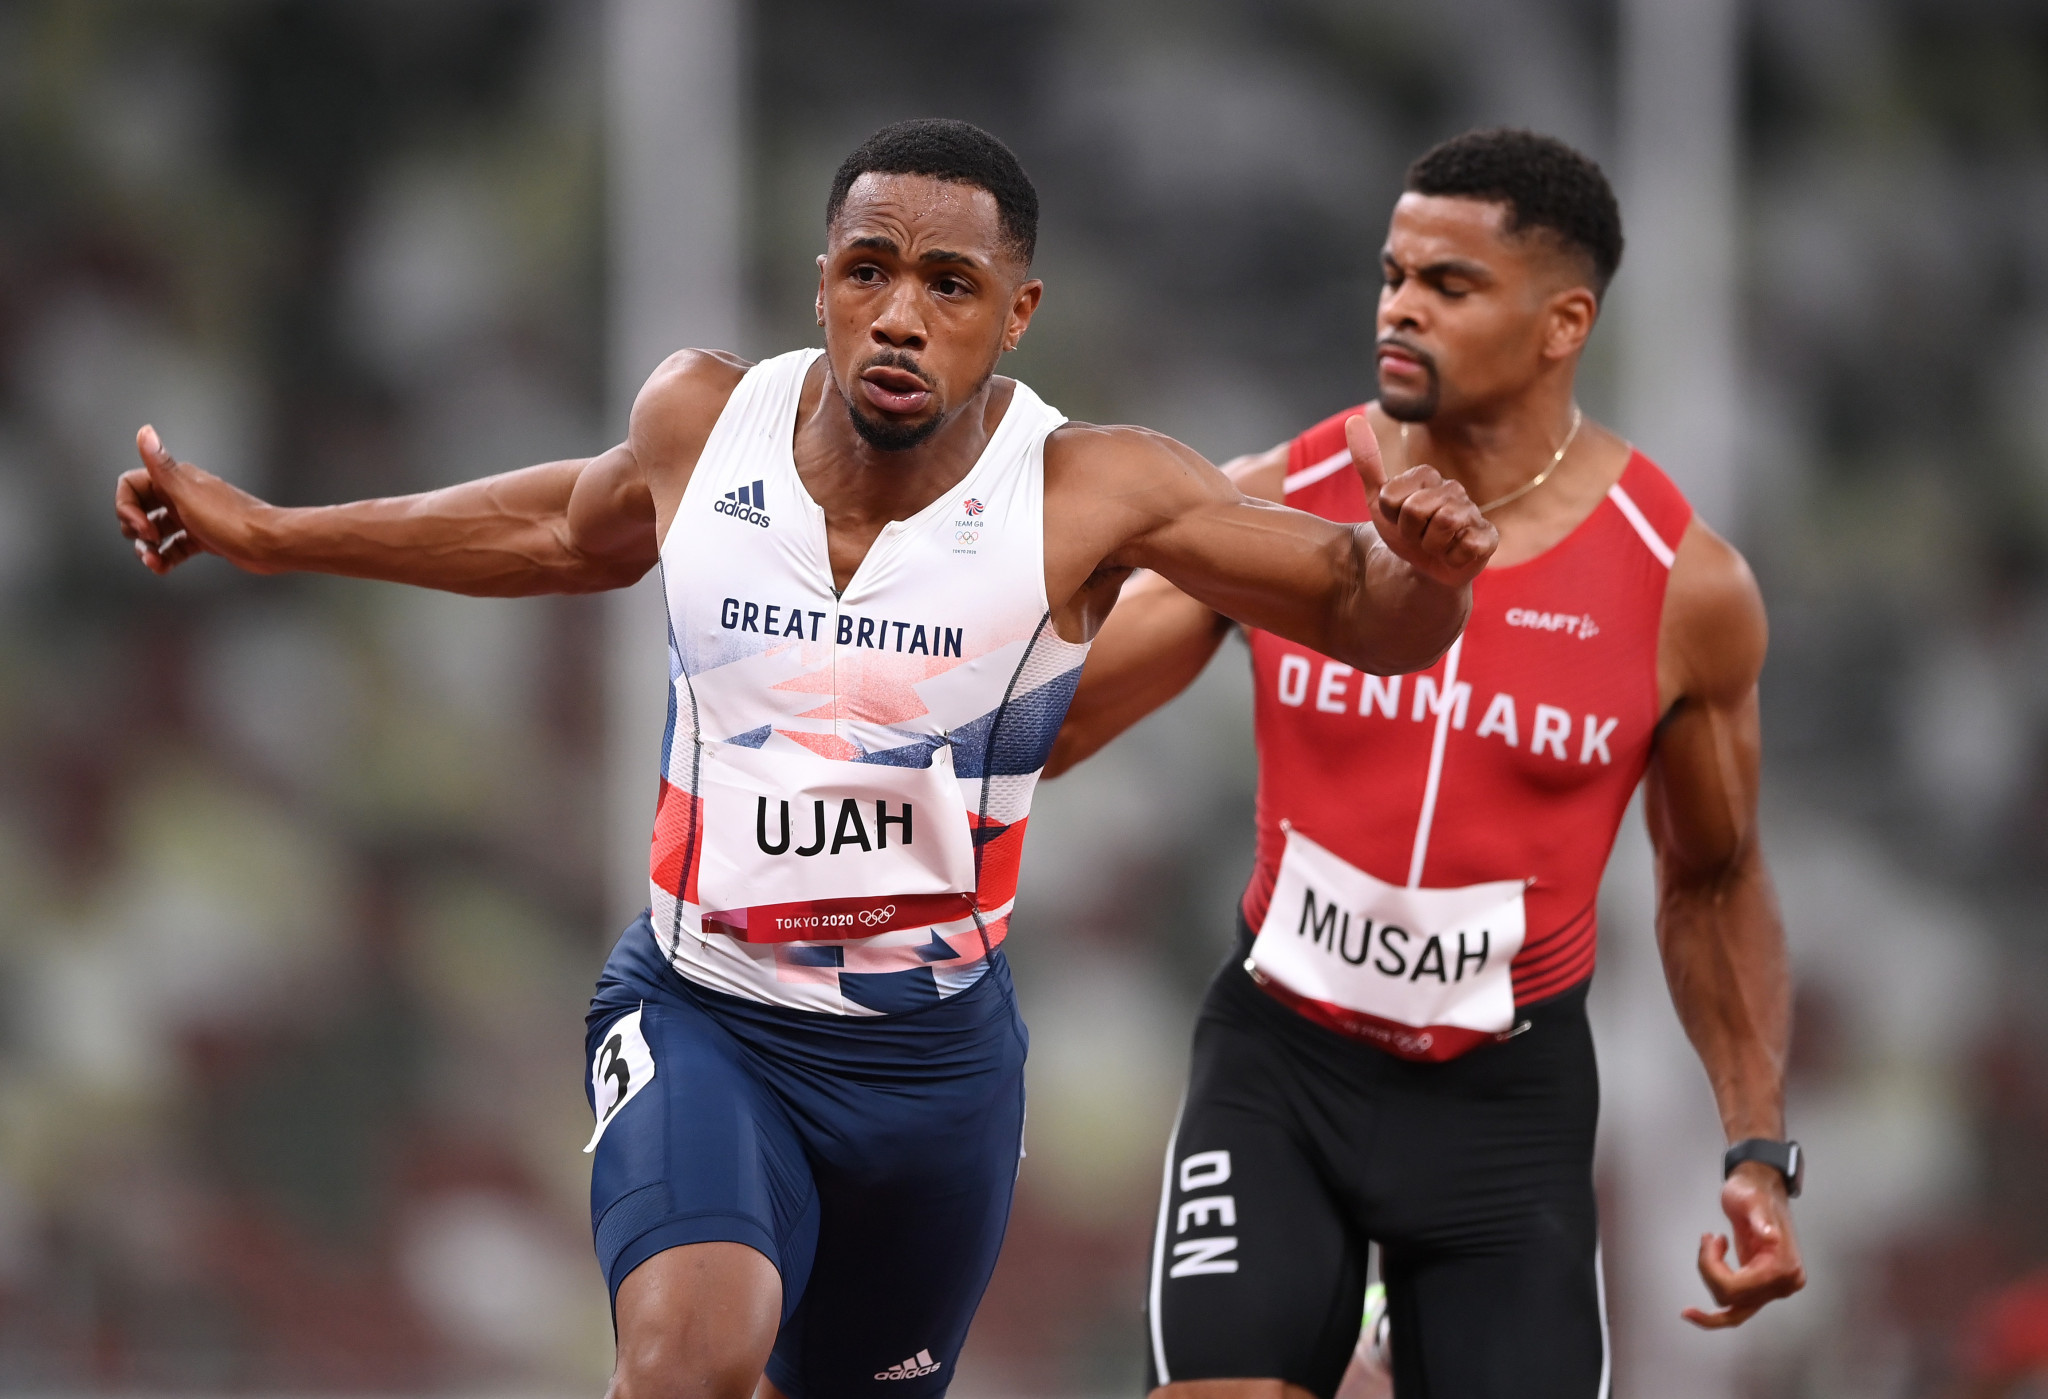 UK Athletics technical director says Ujah will be in selection mix after drugs ban